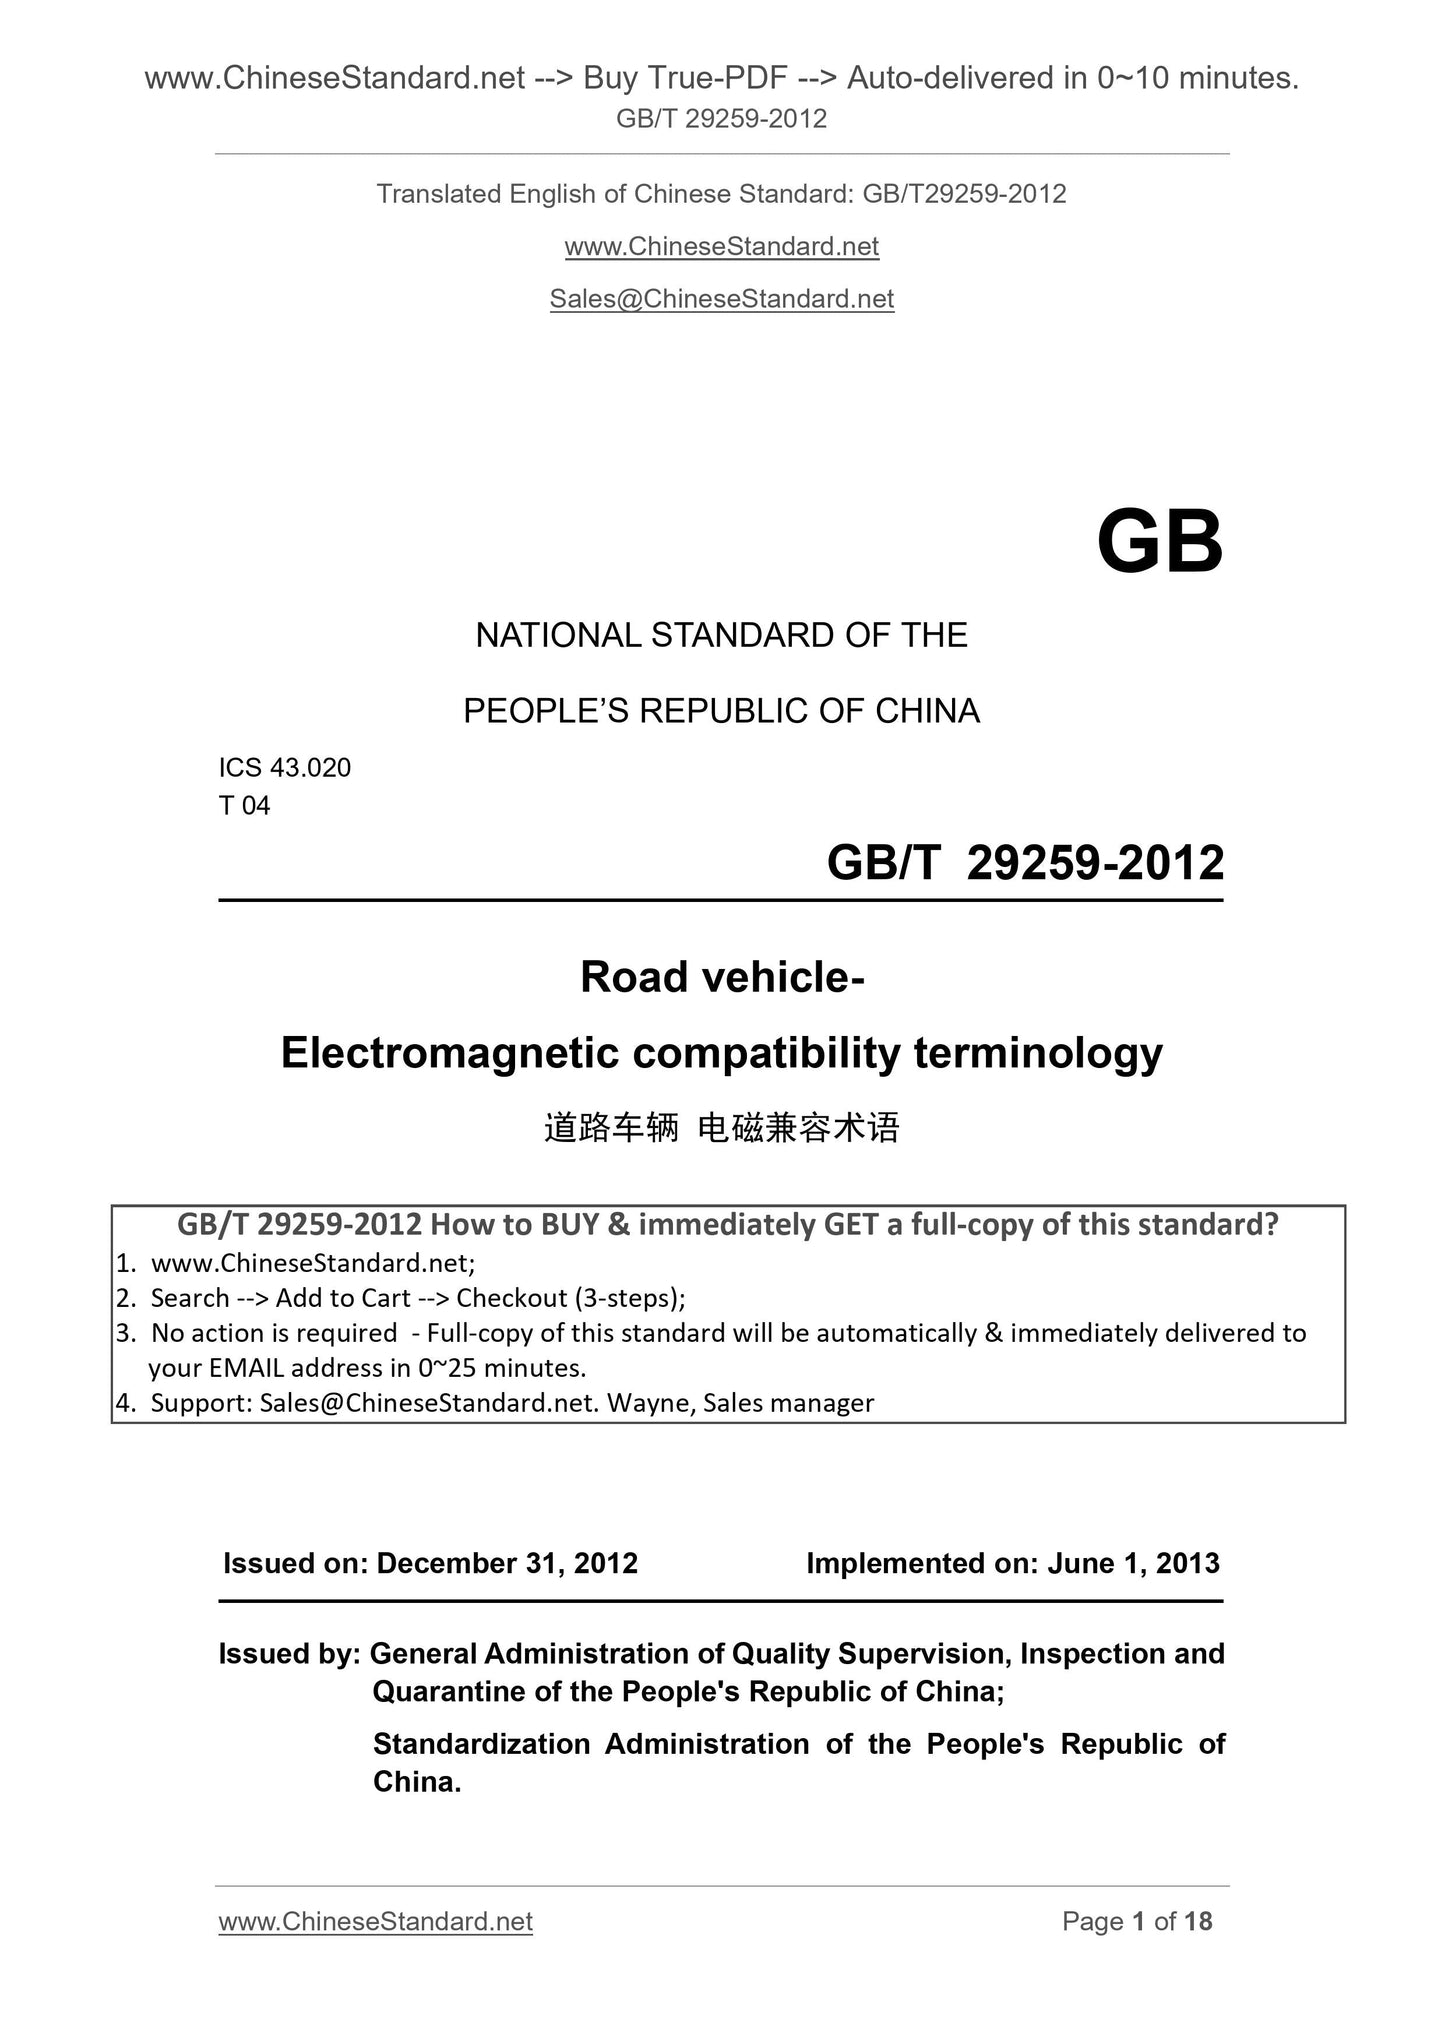 GB/T 29259-2012 Page 1